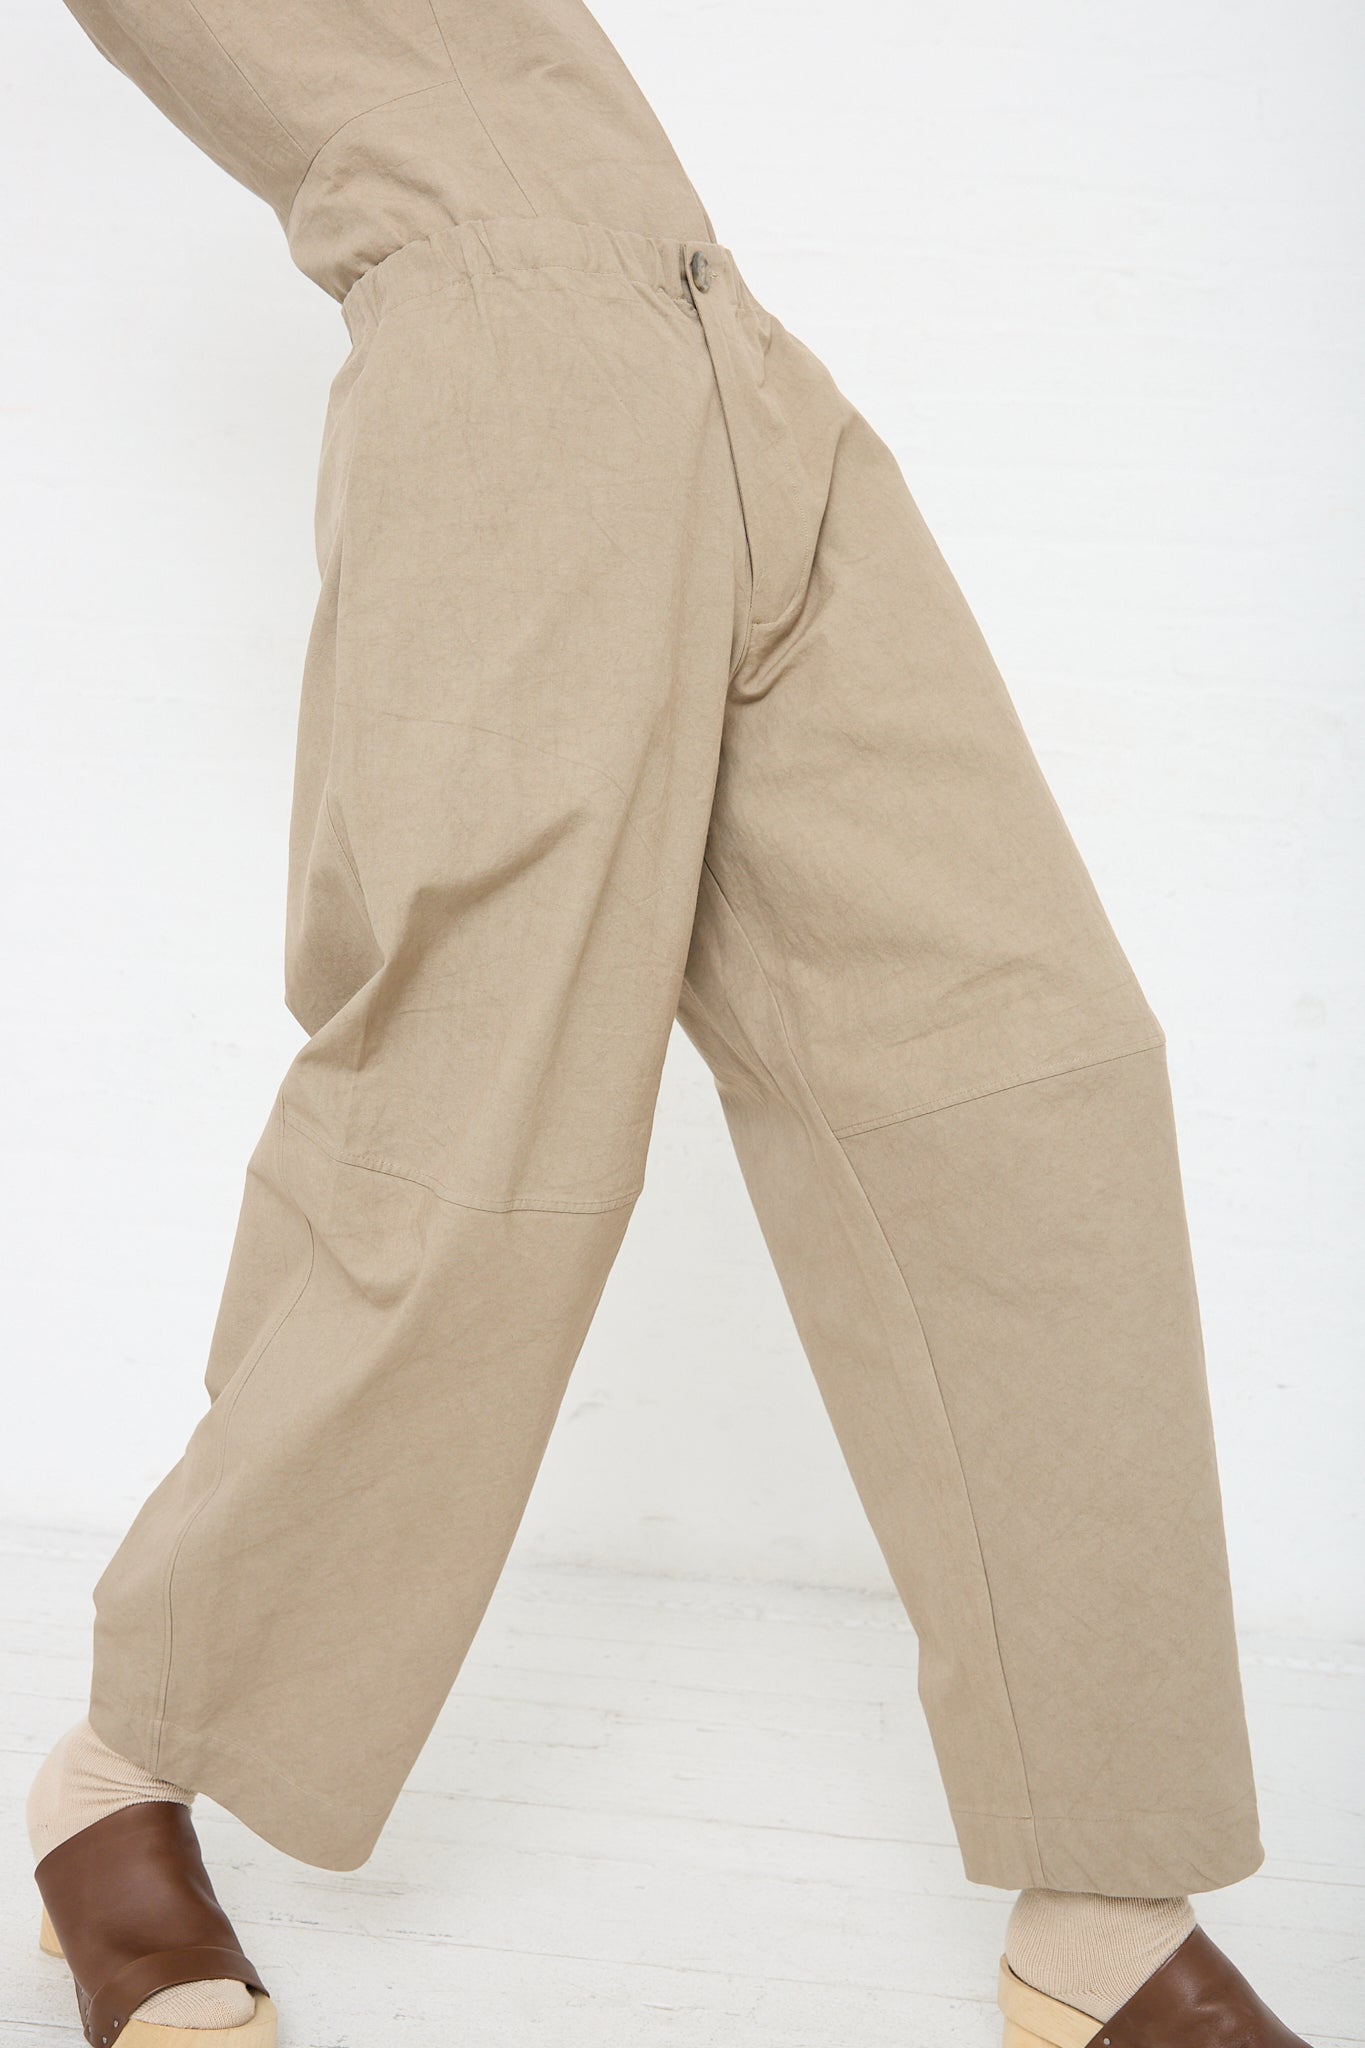 A woman in a New Structure Pant in Drab (Olive brown) by Lauren Manoogian. The model is wearing a matching top and brown sandals. Profile view. 